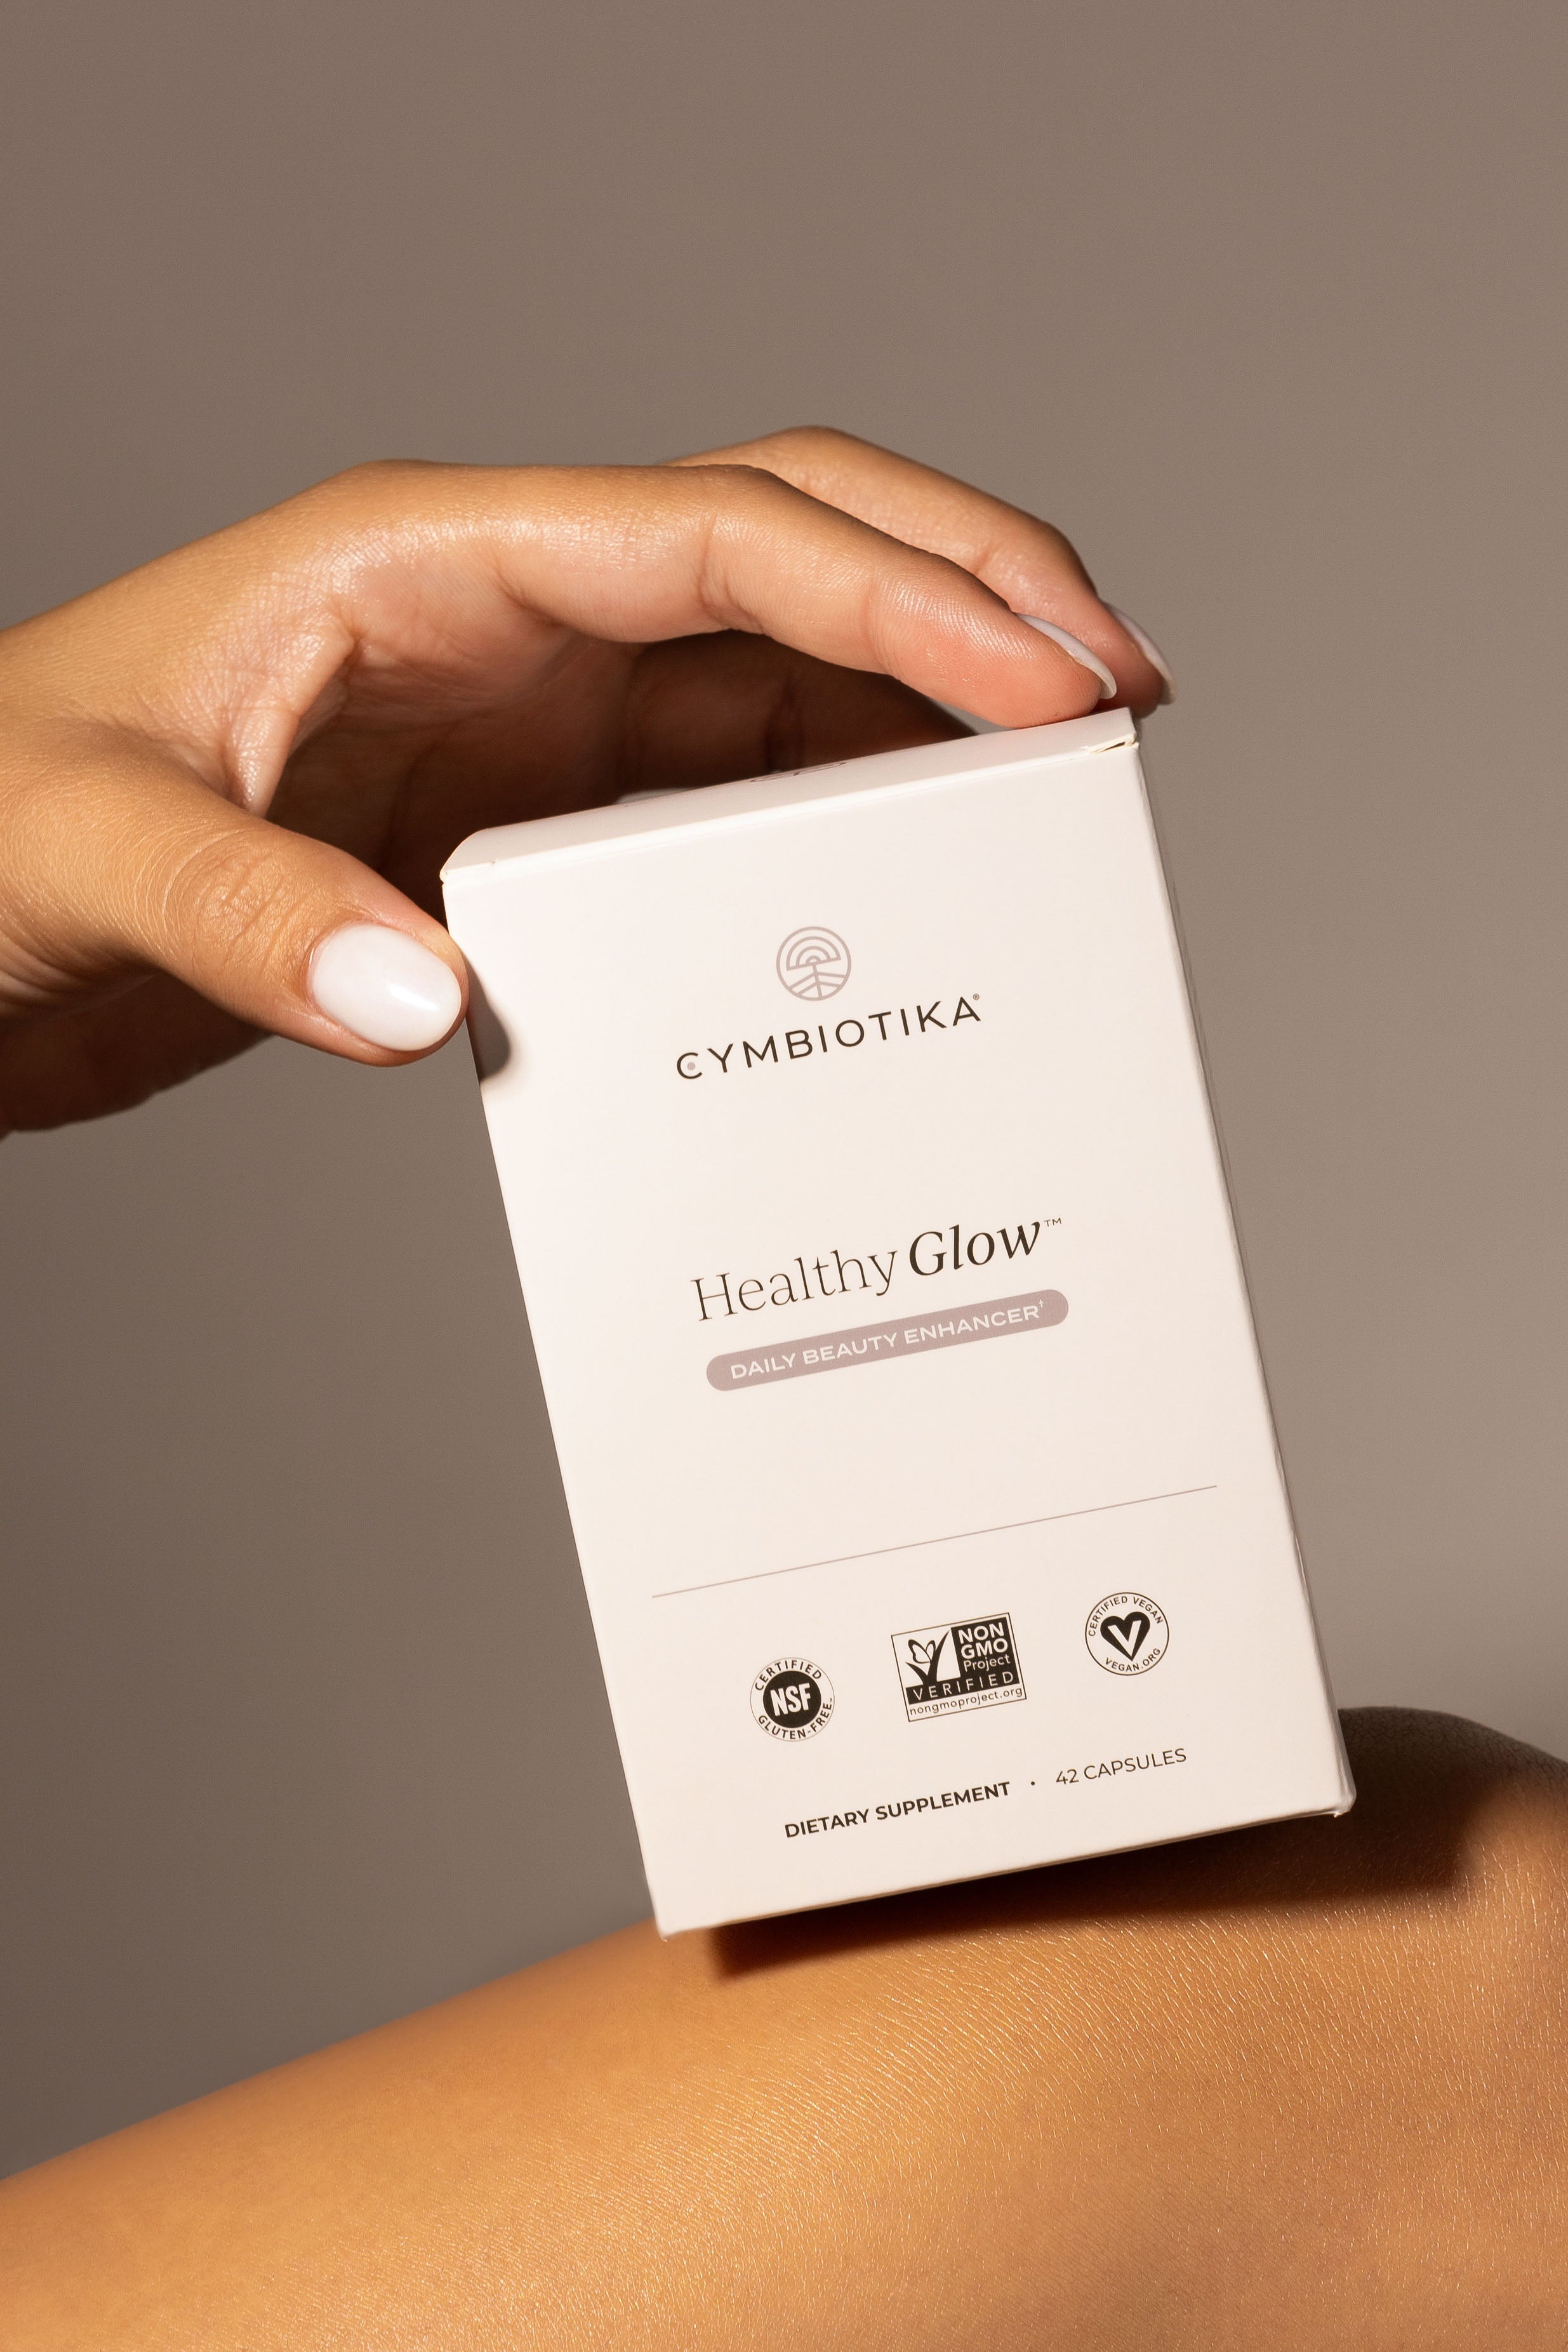 Introducing Cymbiotika's Newest Breakthrough: Healthy Glow - A Functional Approach to Beauty